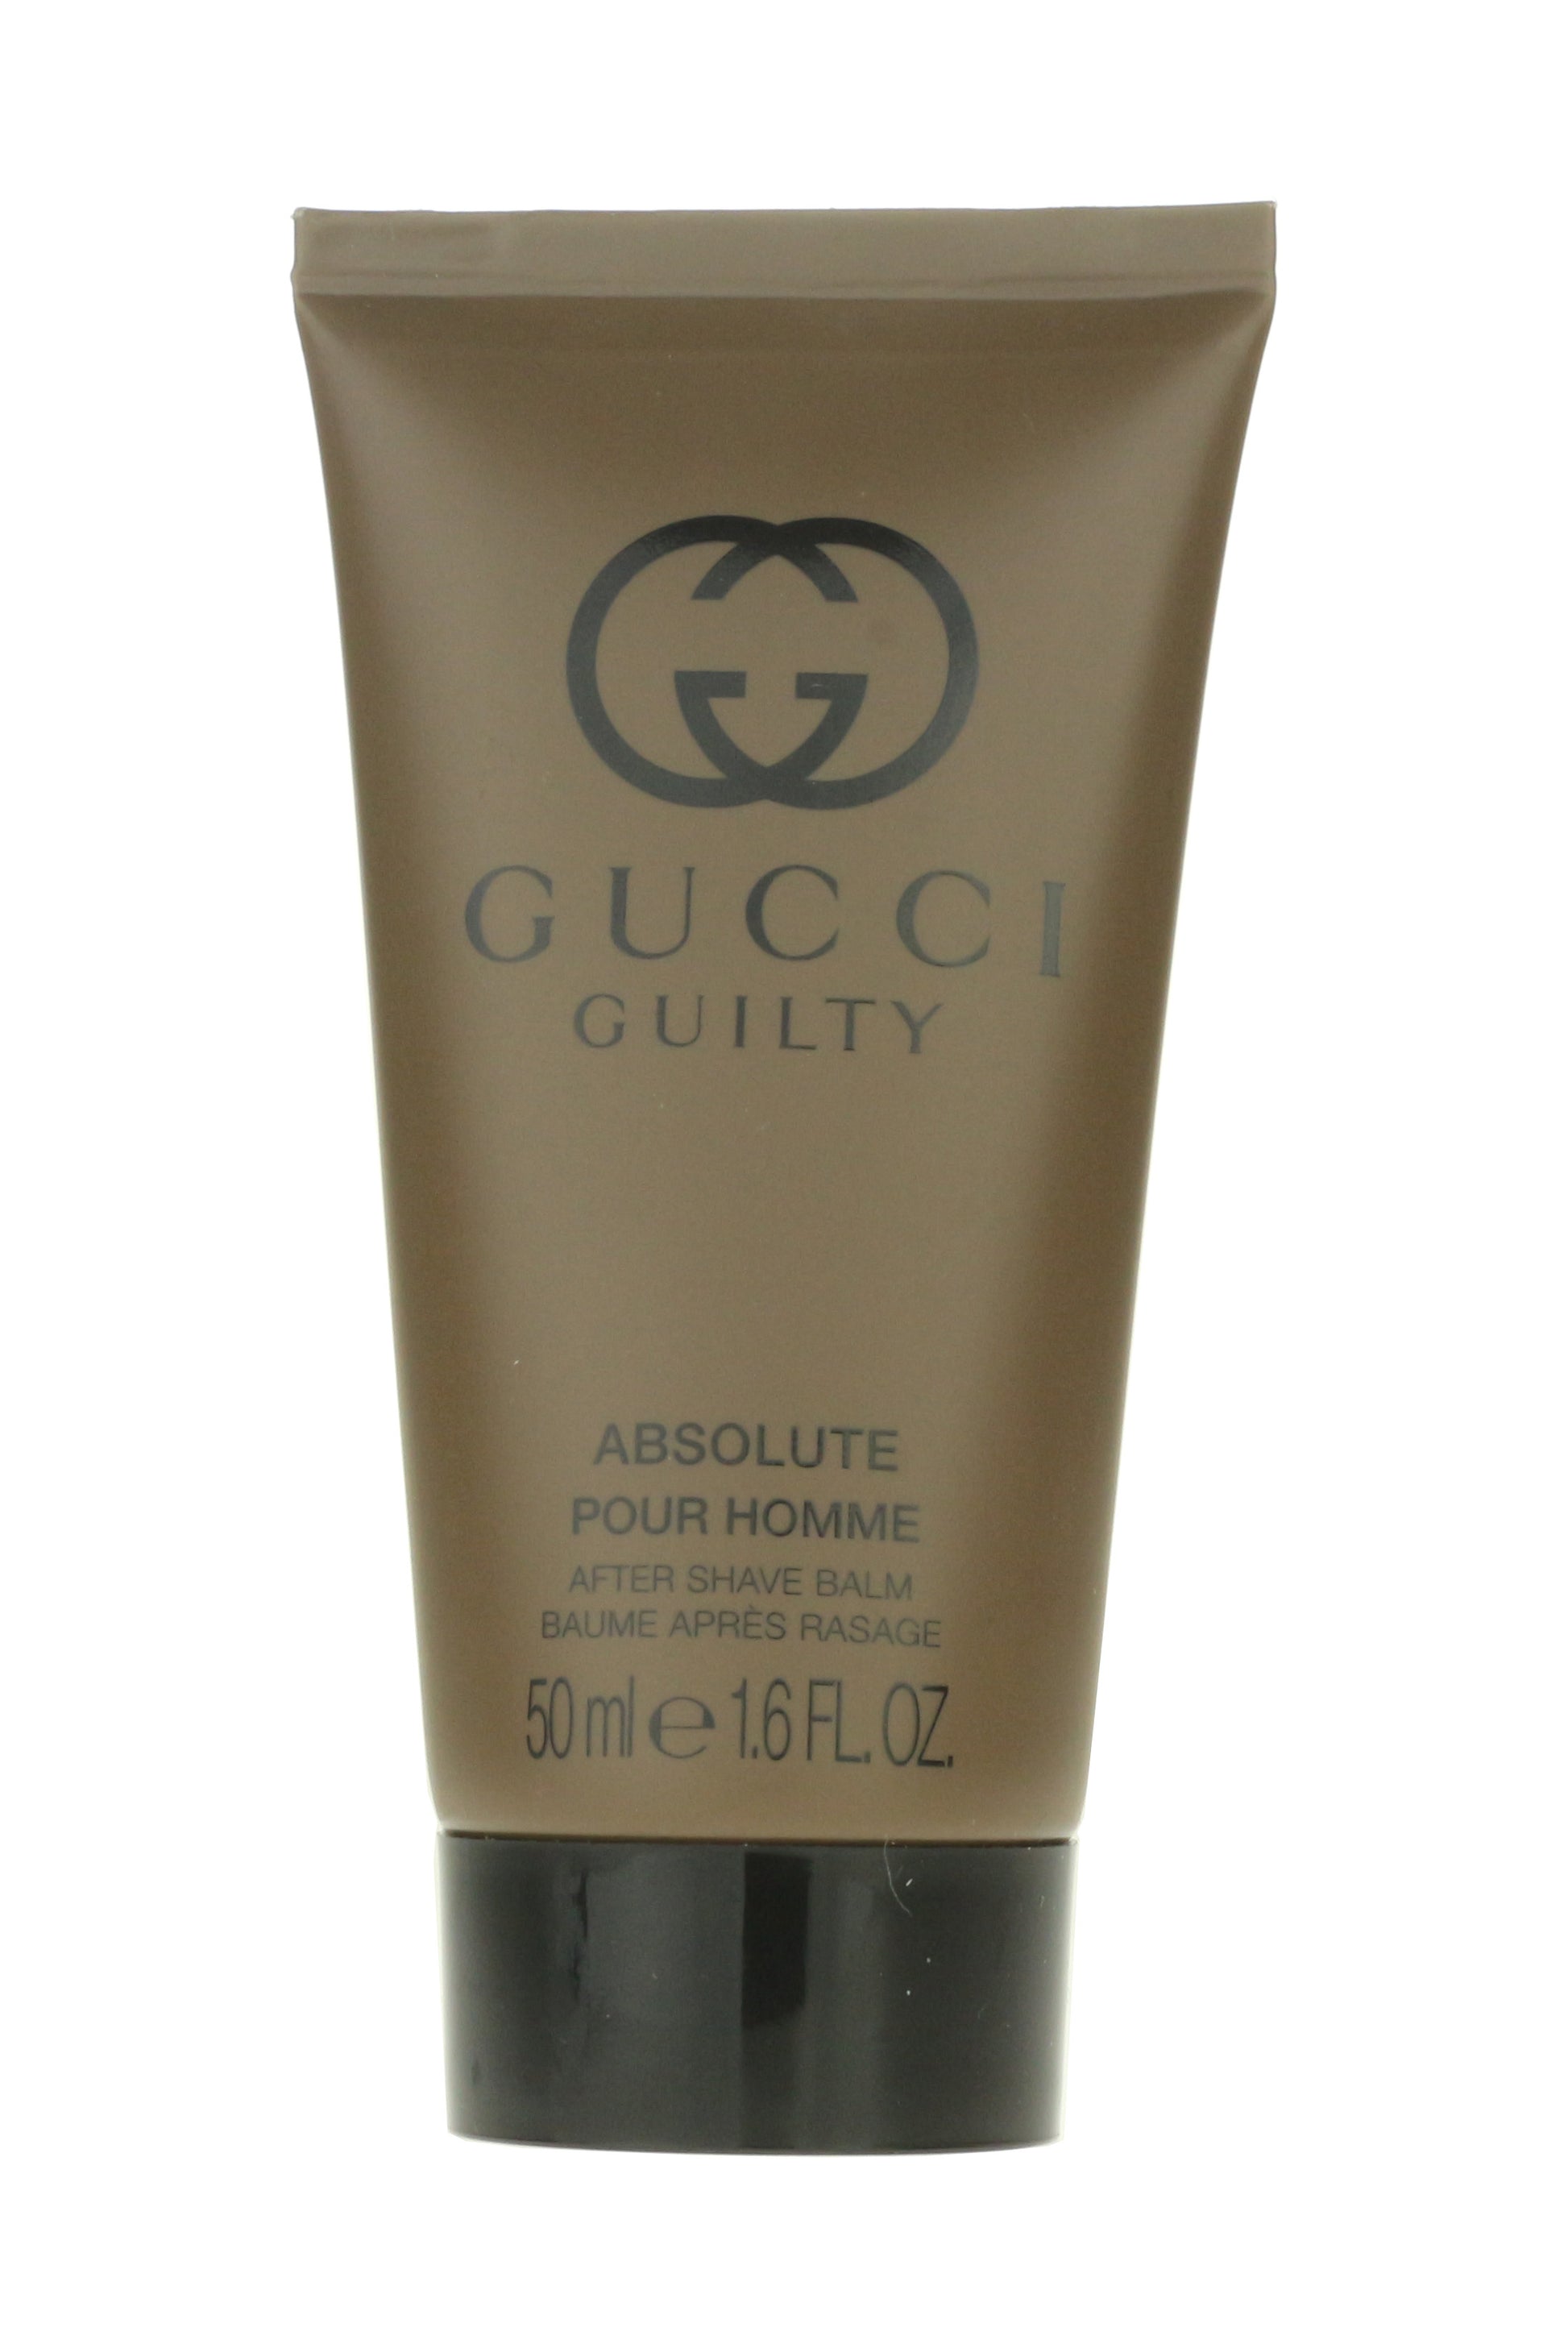 Guilty Absolute Pour Homme After Shave Balm 50 ml